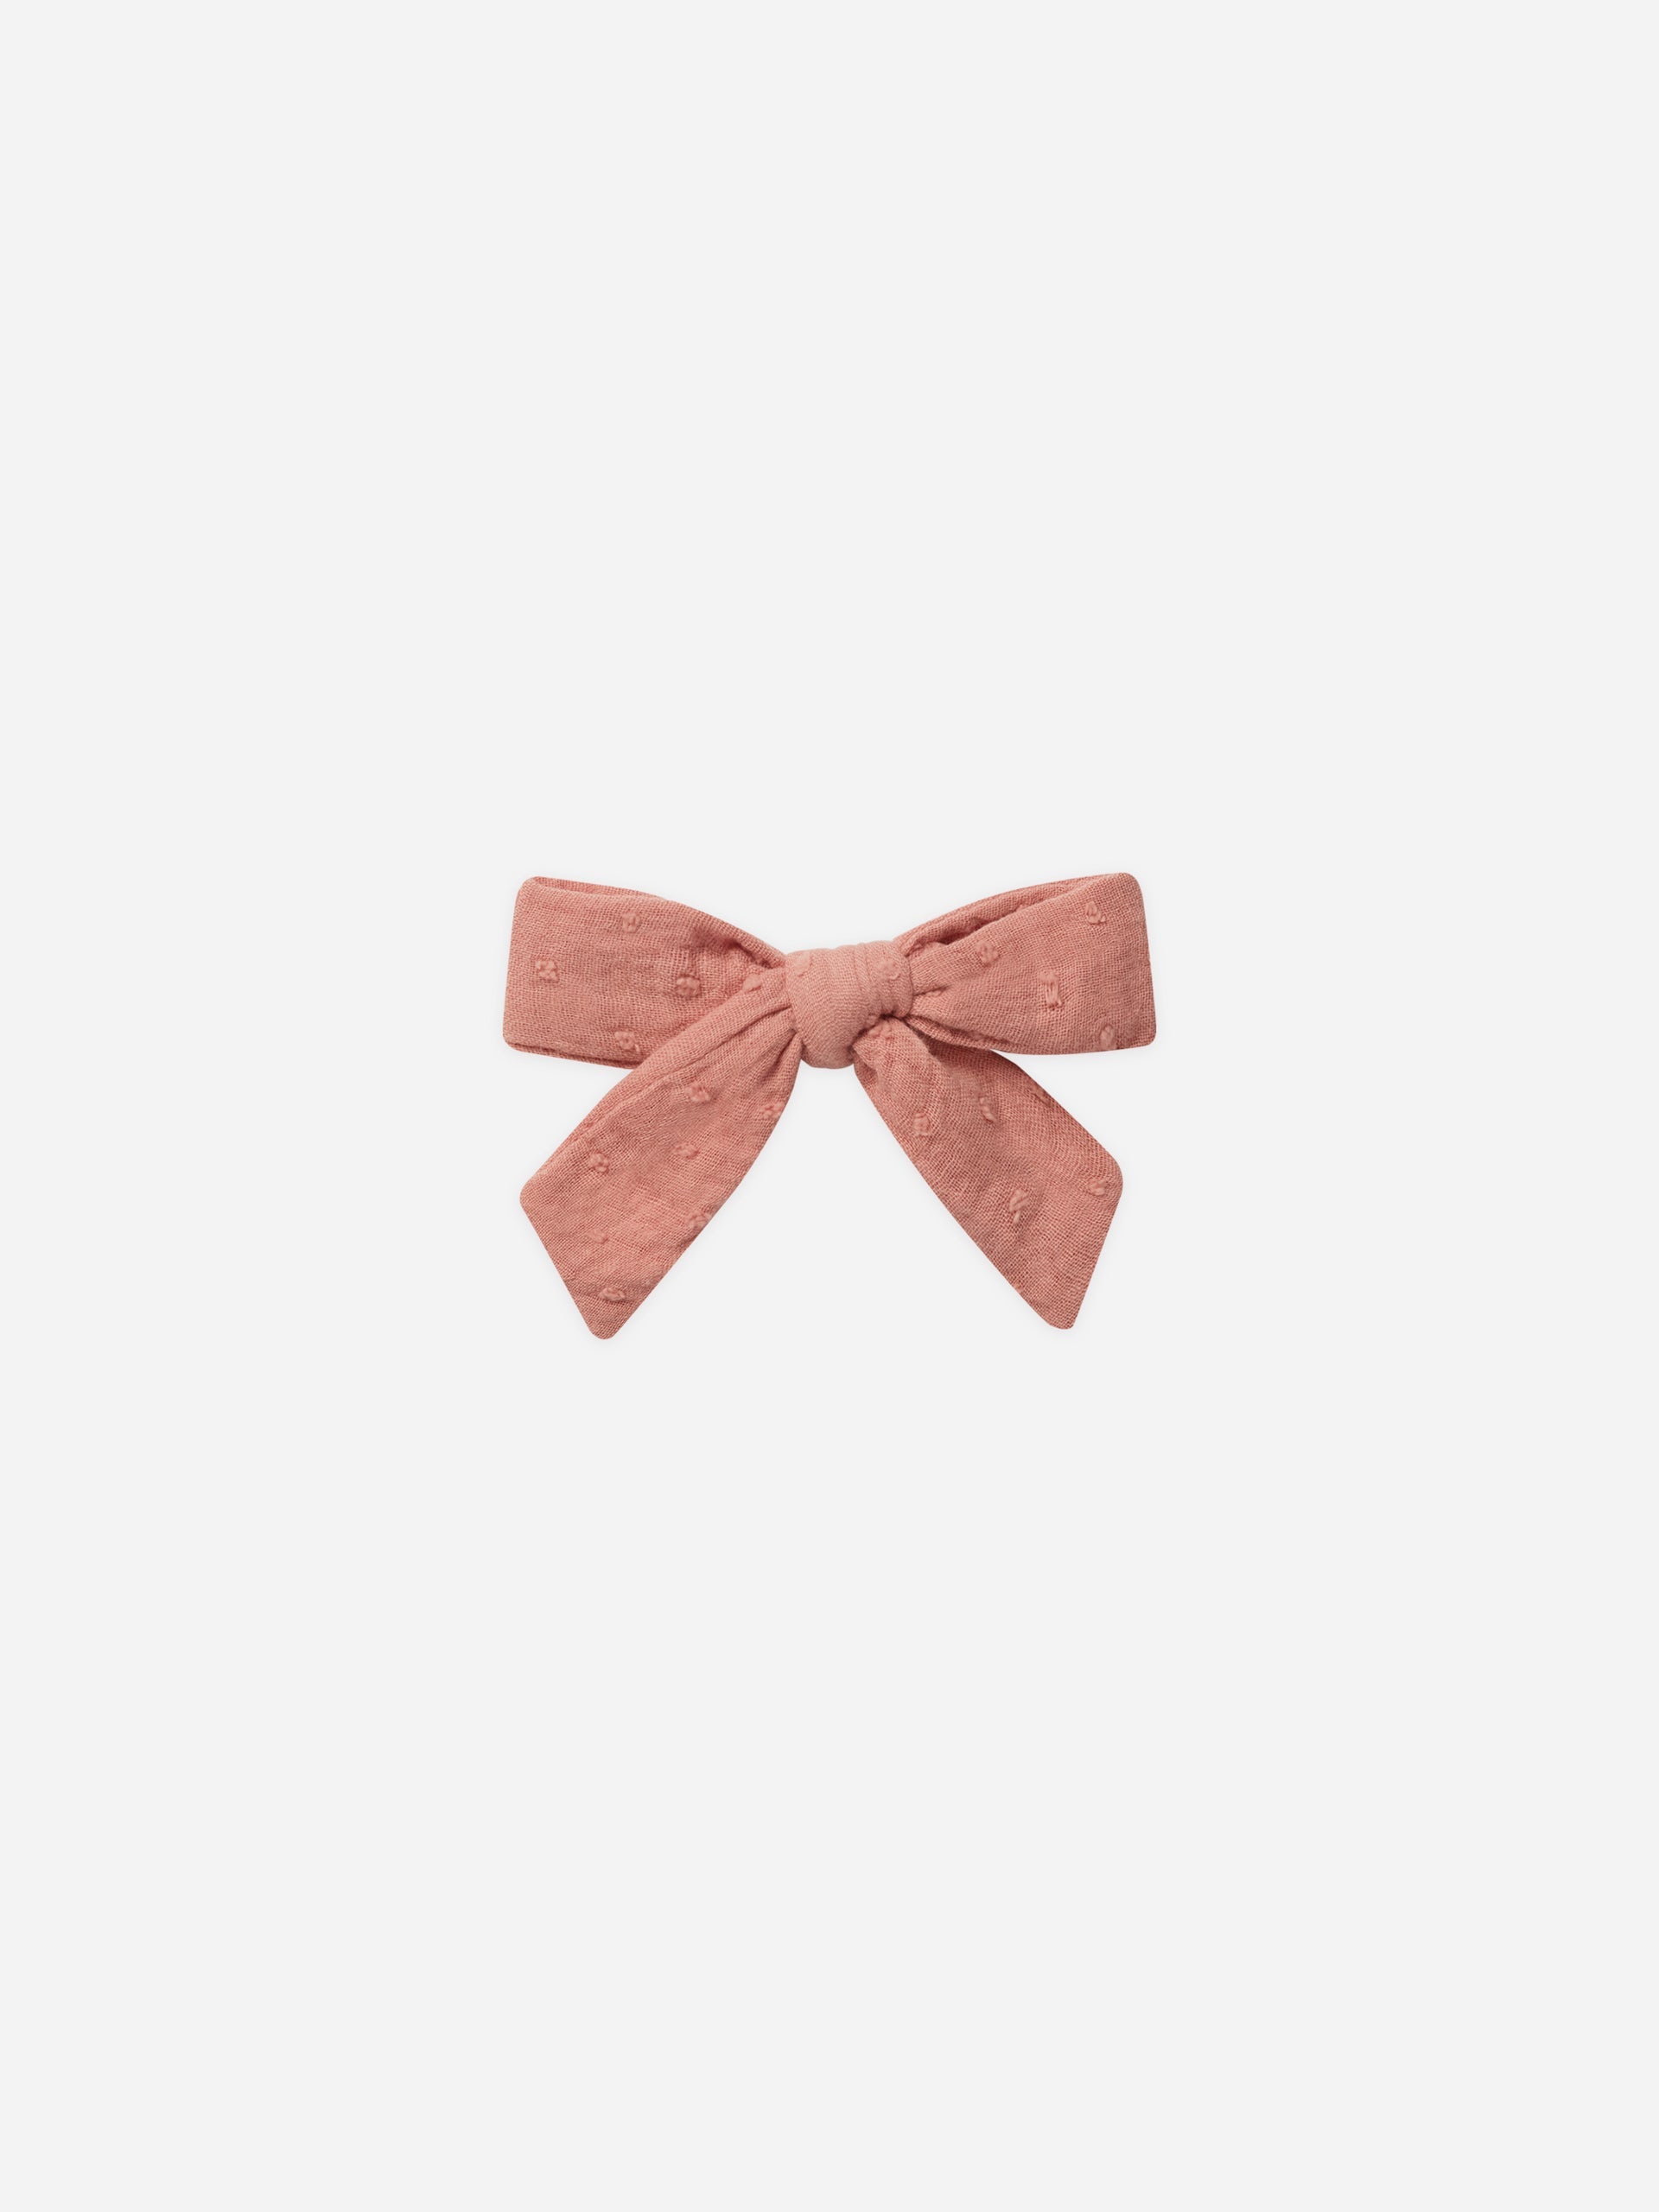 Girl Bow || Lipstick - Rylee + Cru | Kids Clothes | Trendy Baby Clothes | Modern Infant Outfits |